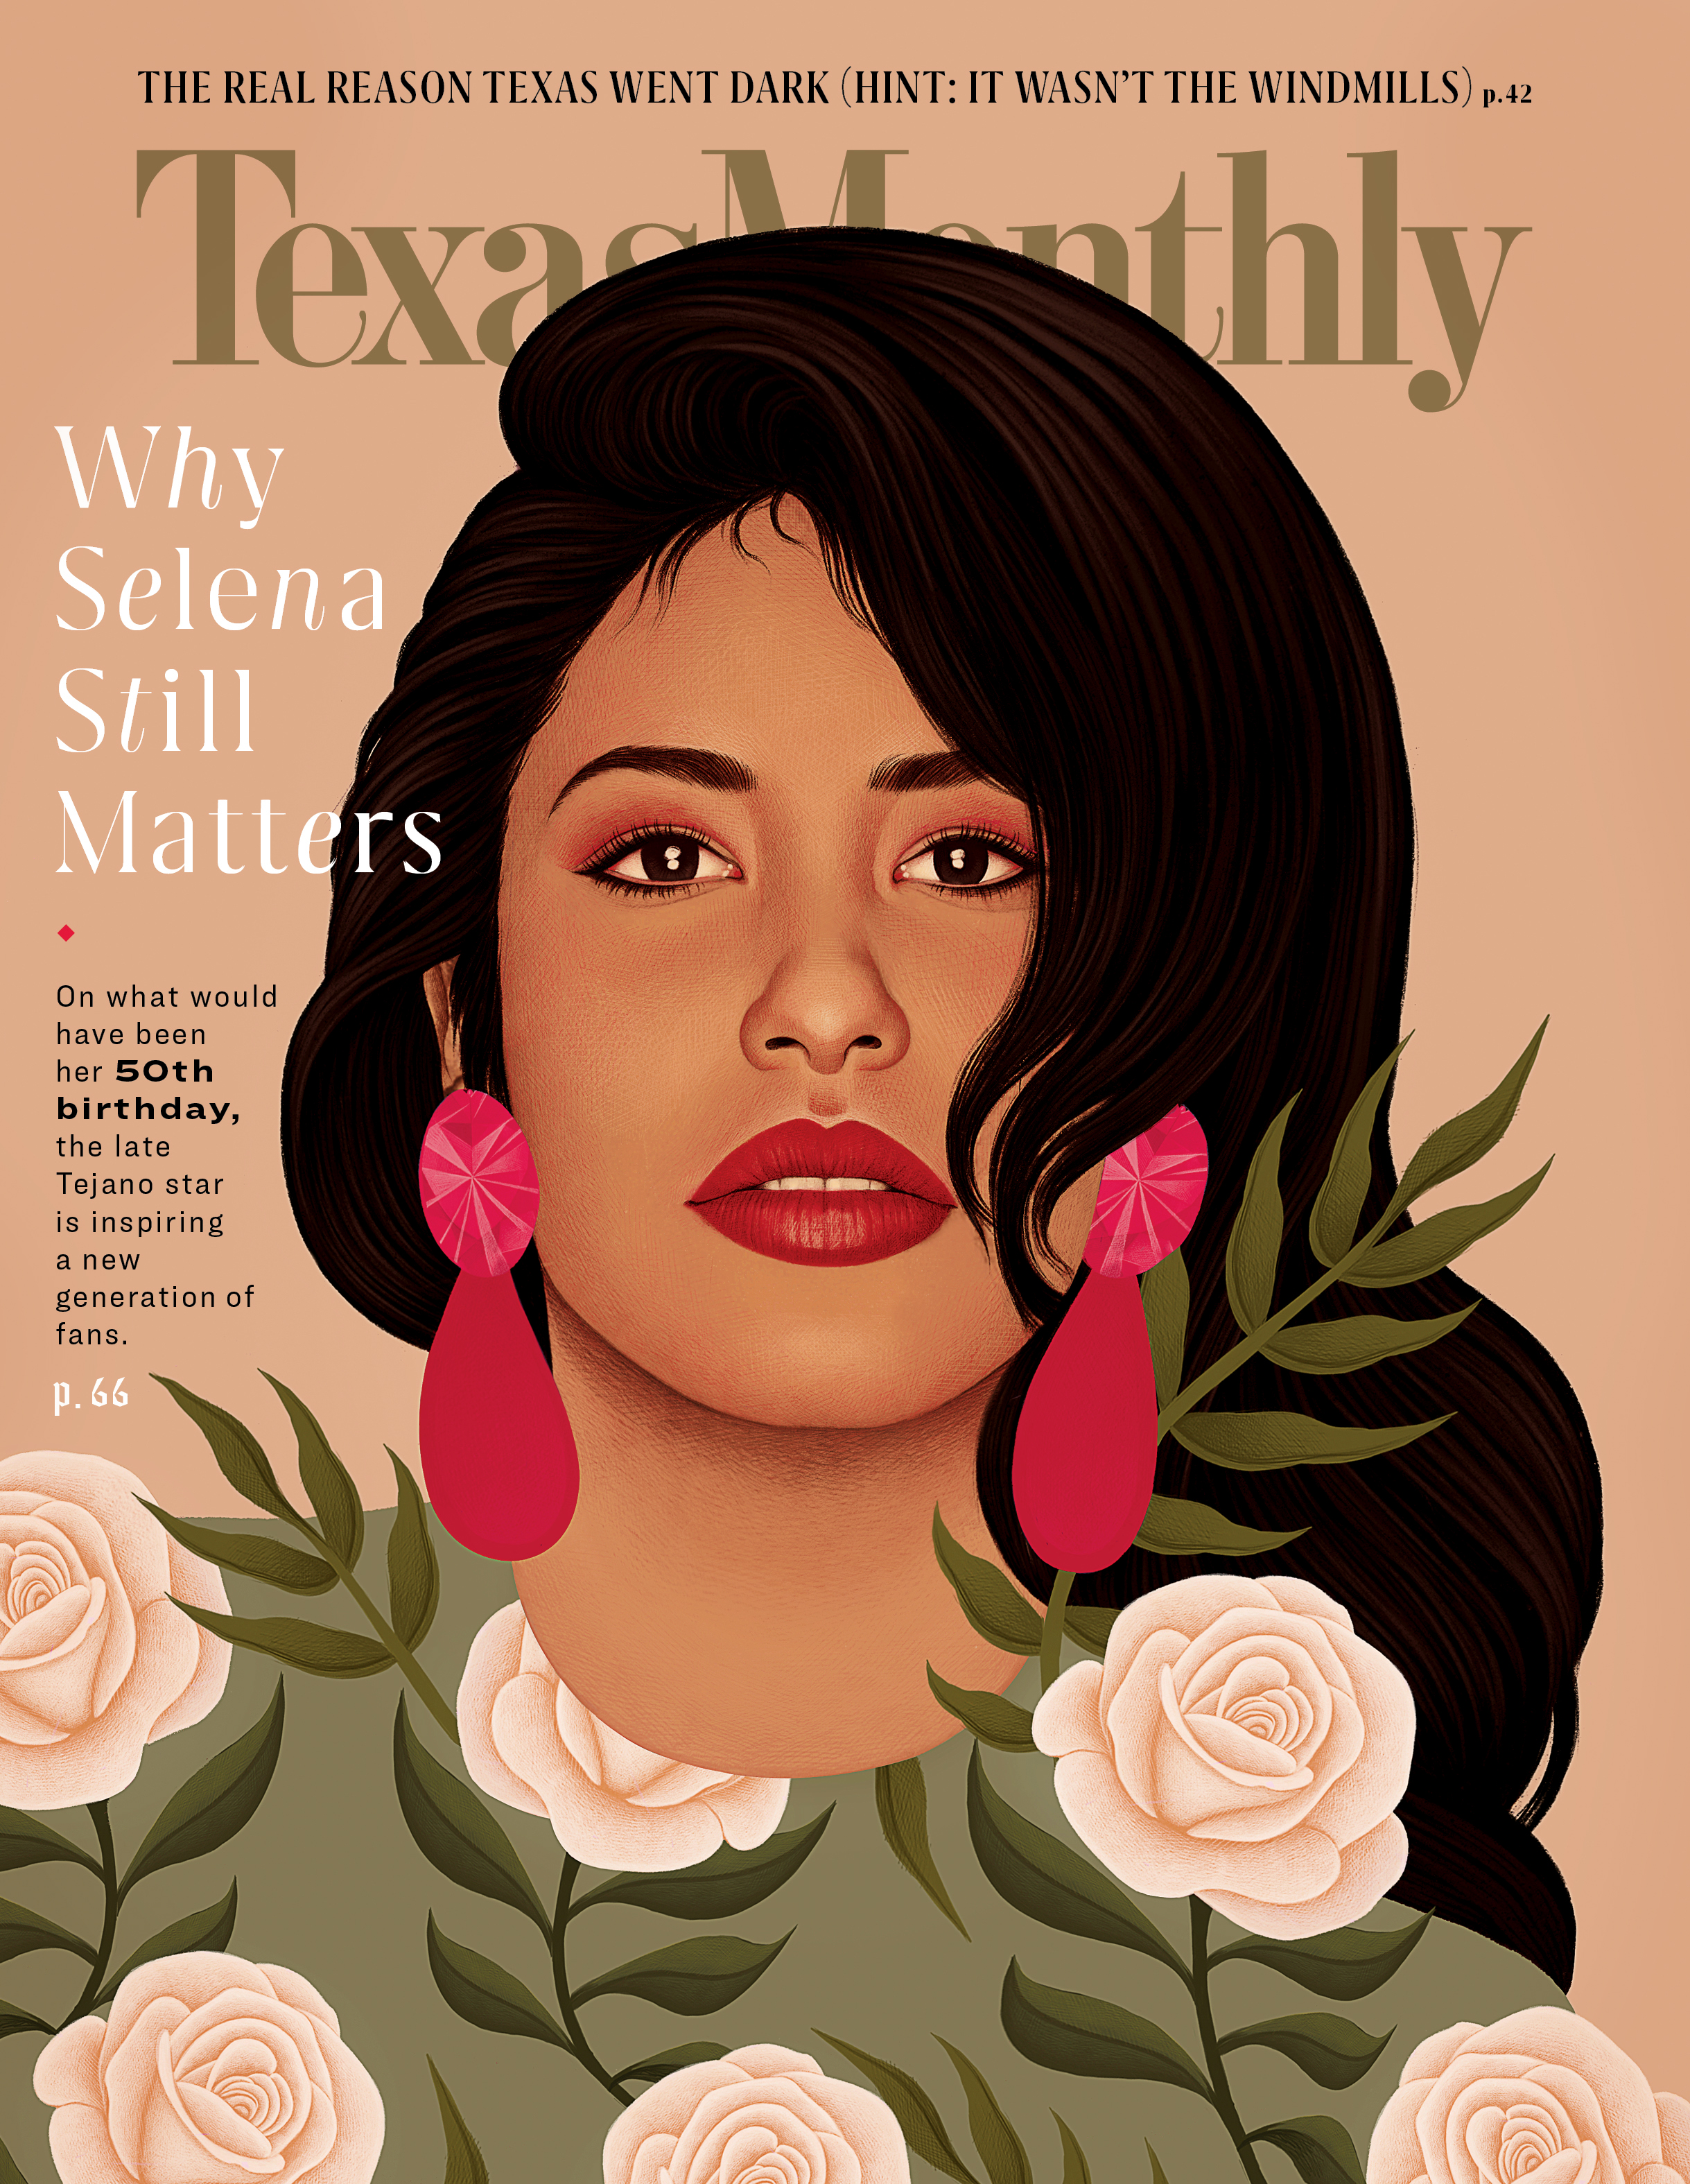 Texas Monthly - "Why Selena Still Matters," April 2021